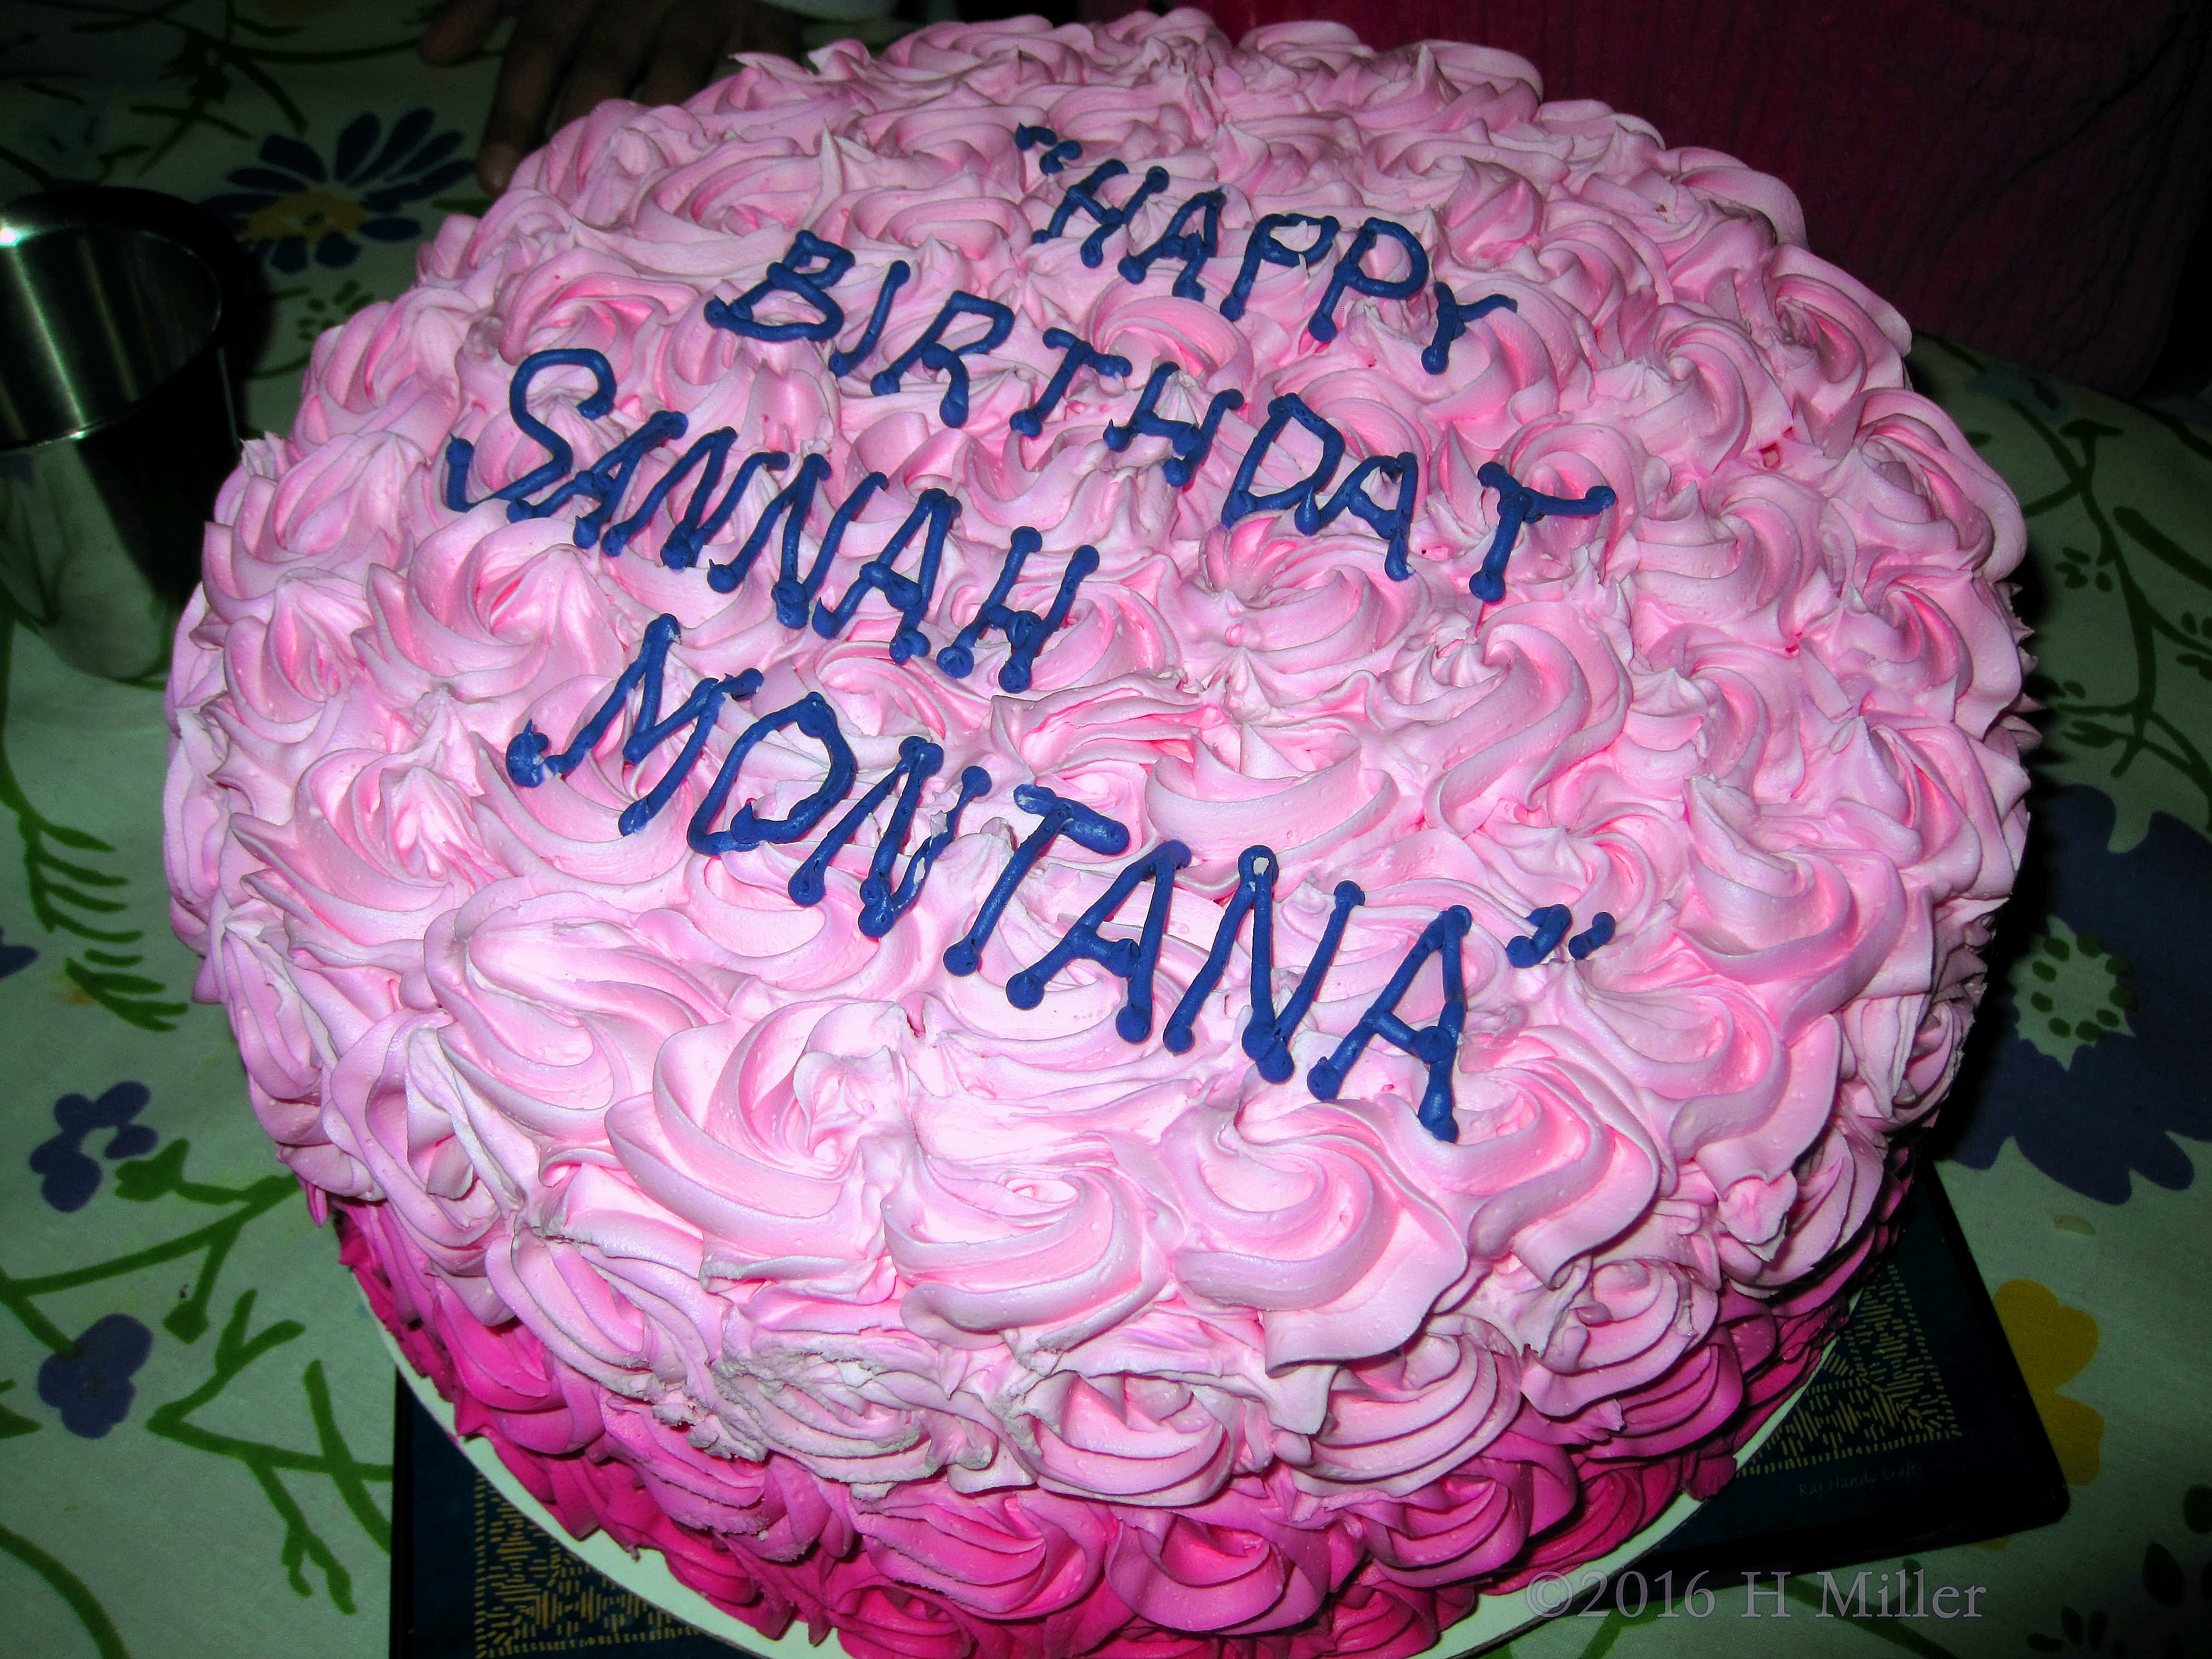 Yummy Looking Pink Cake For Sanjana's Spa Birthday Party.